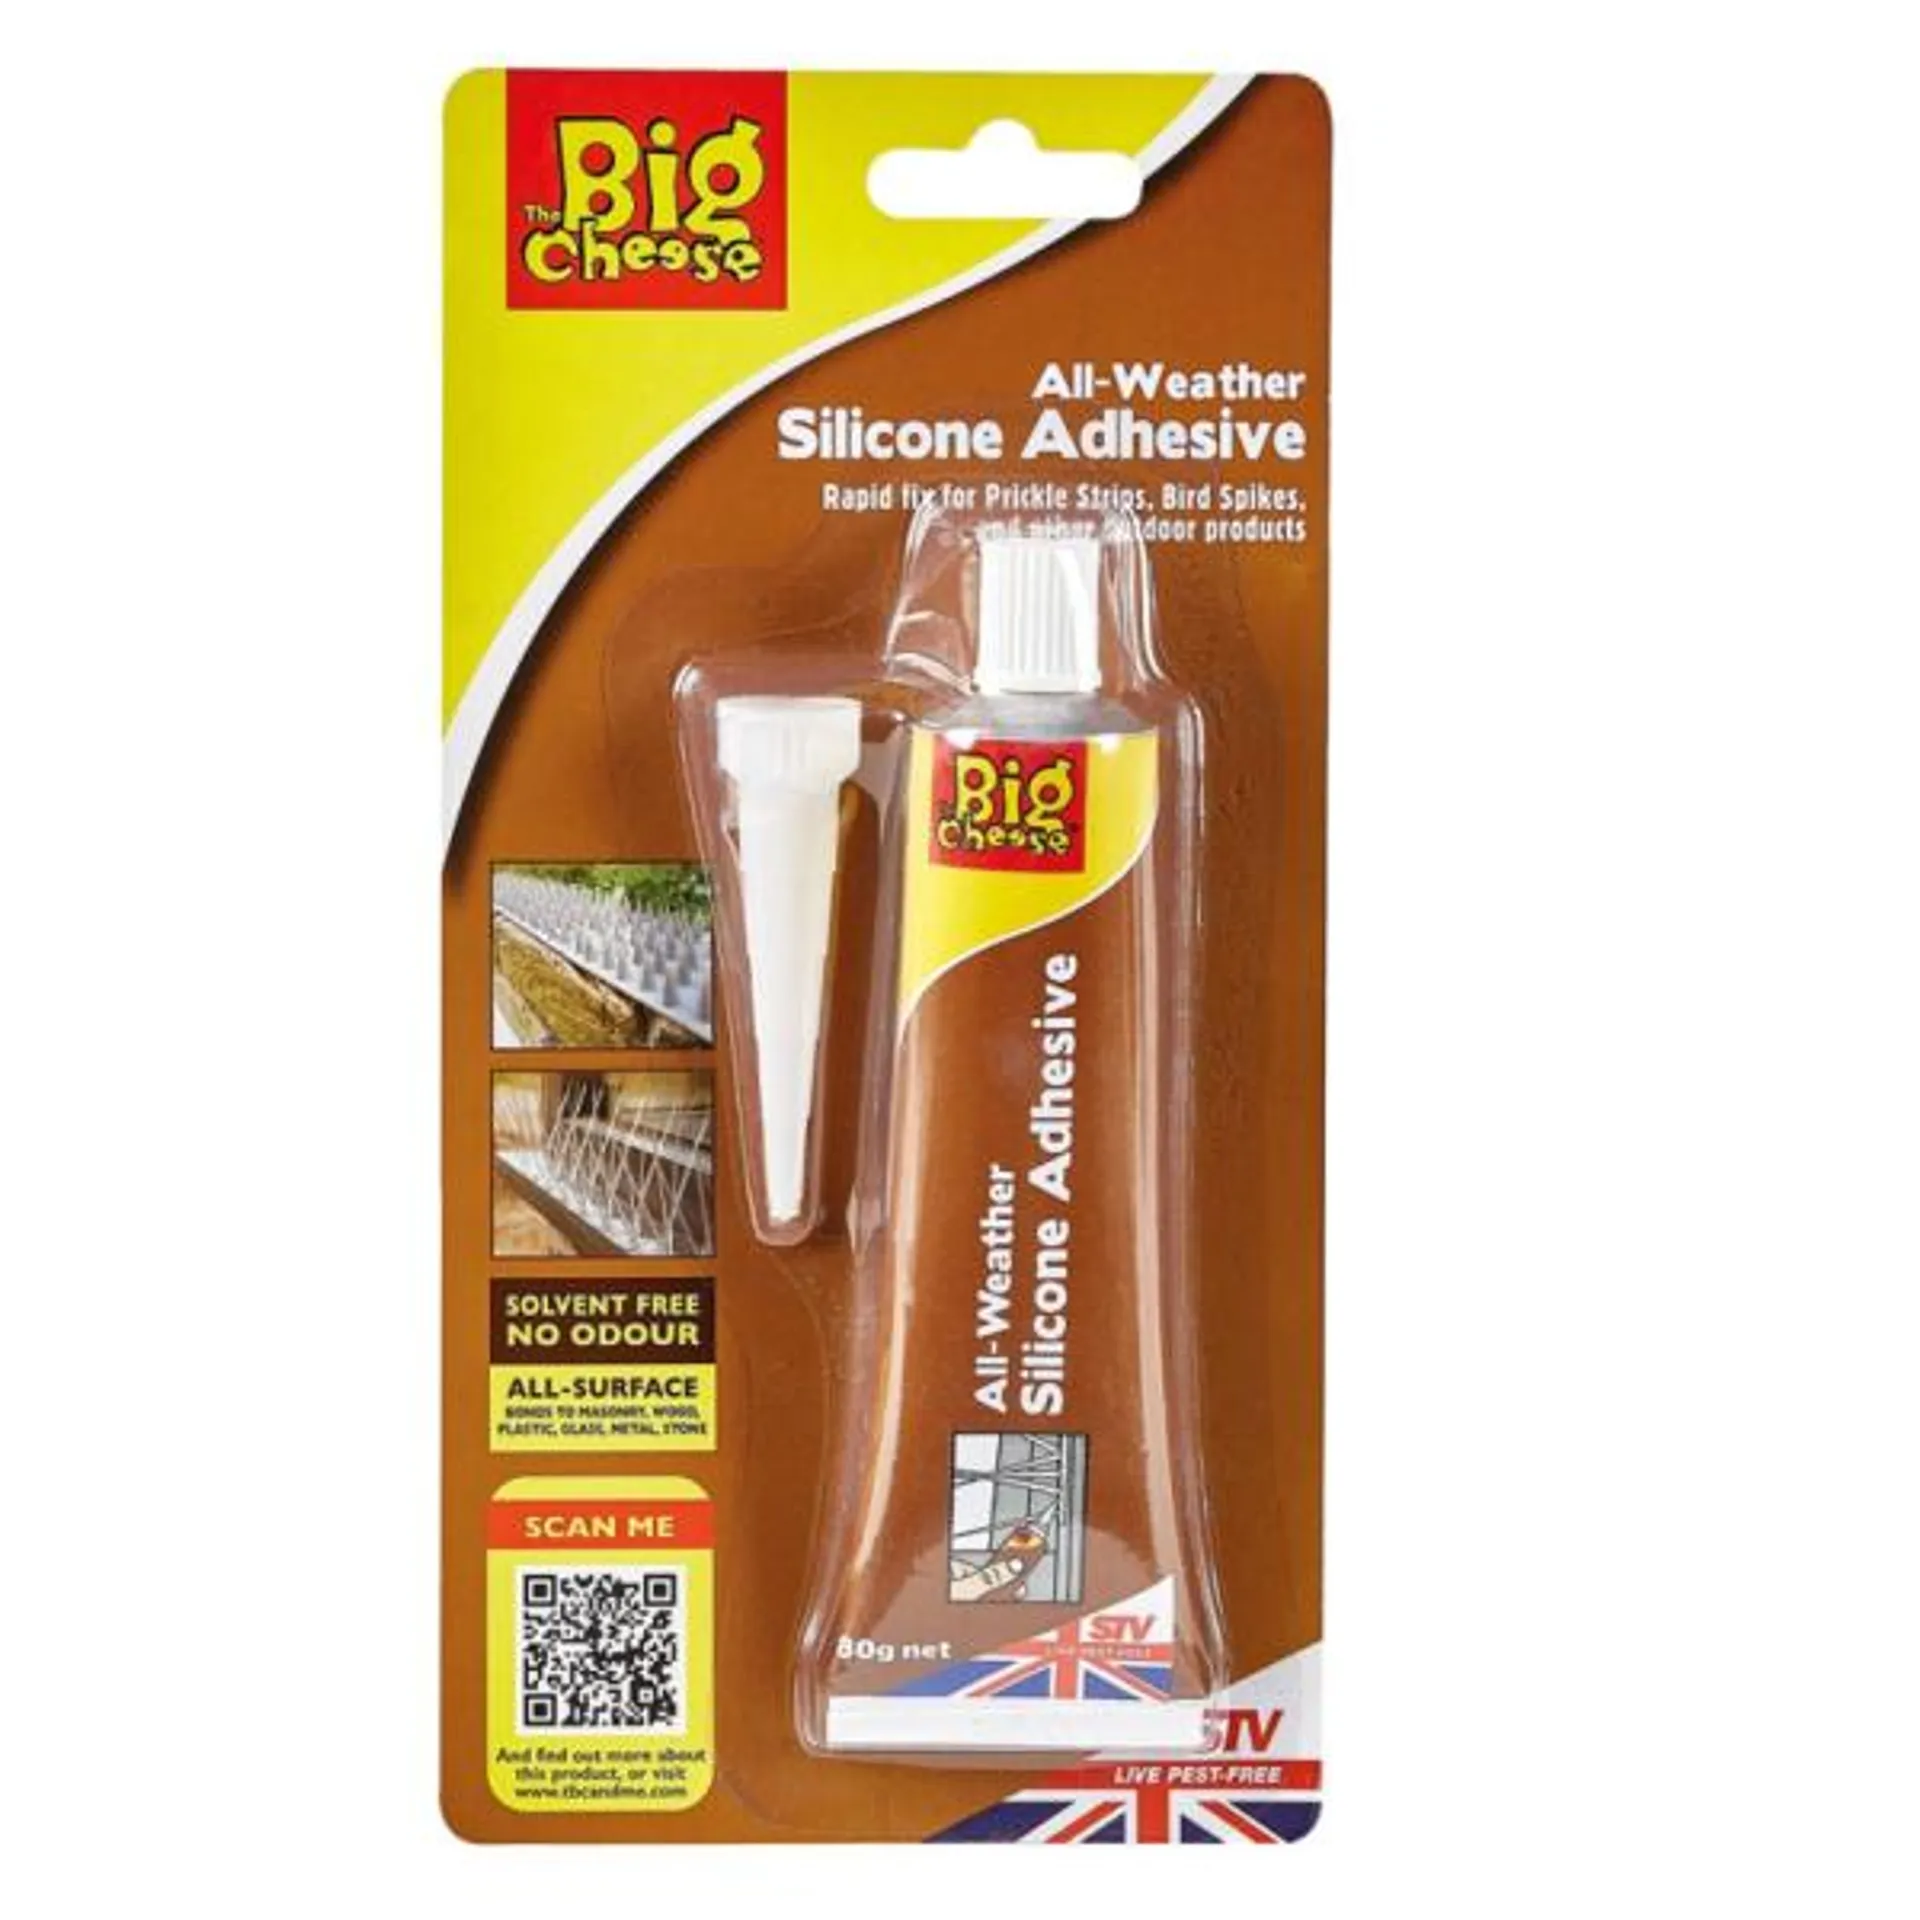 Big Cheese All-Weather Silicone Adhesive 80g